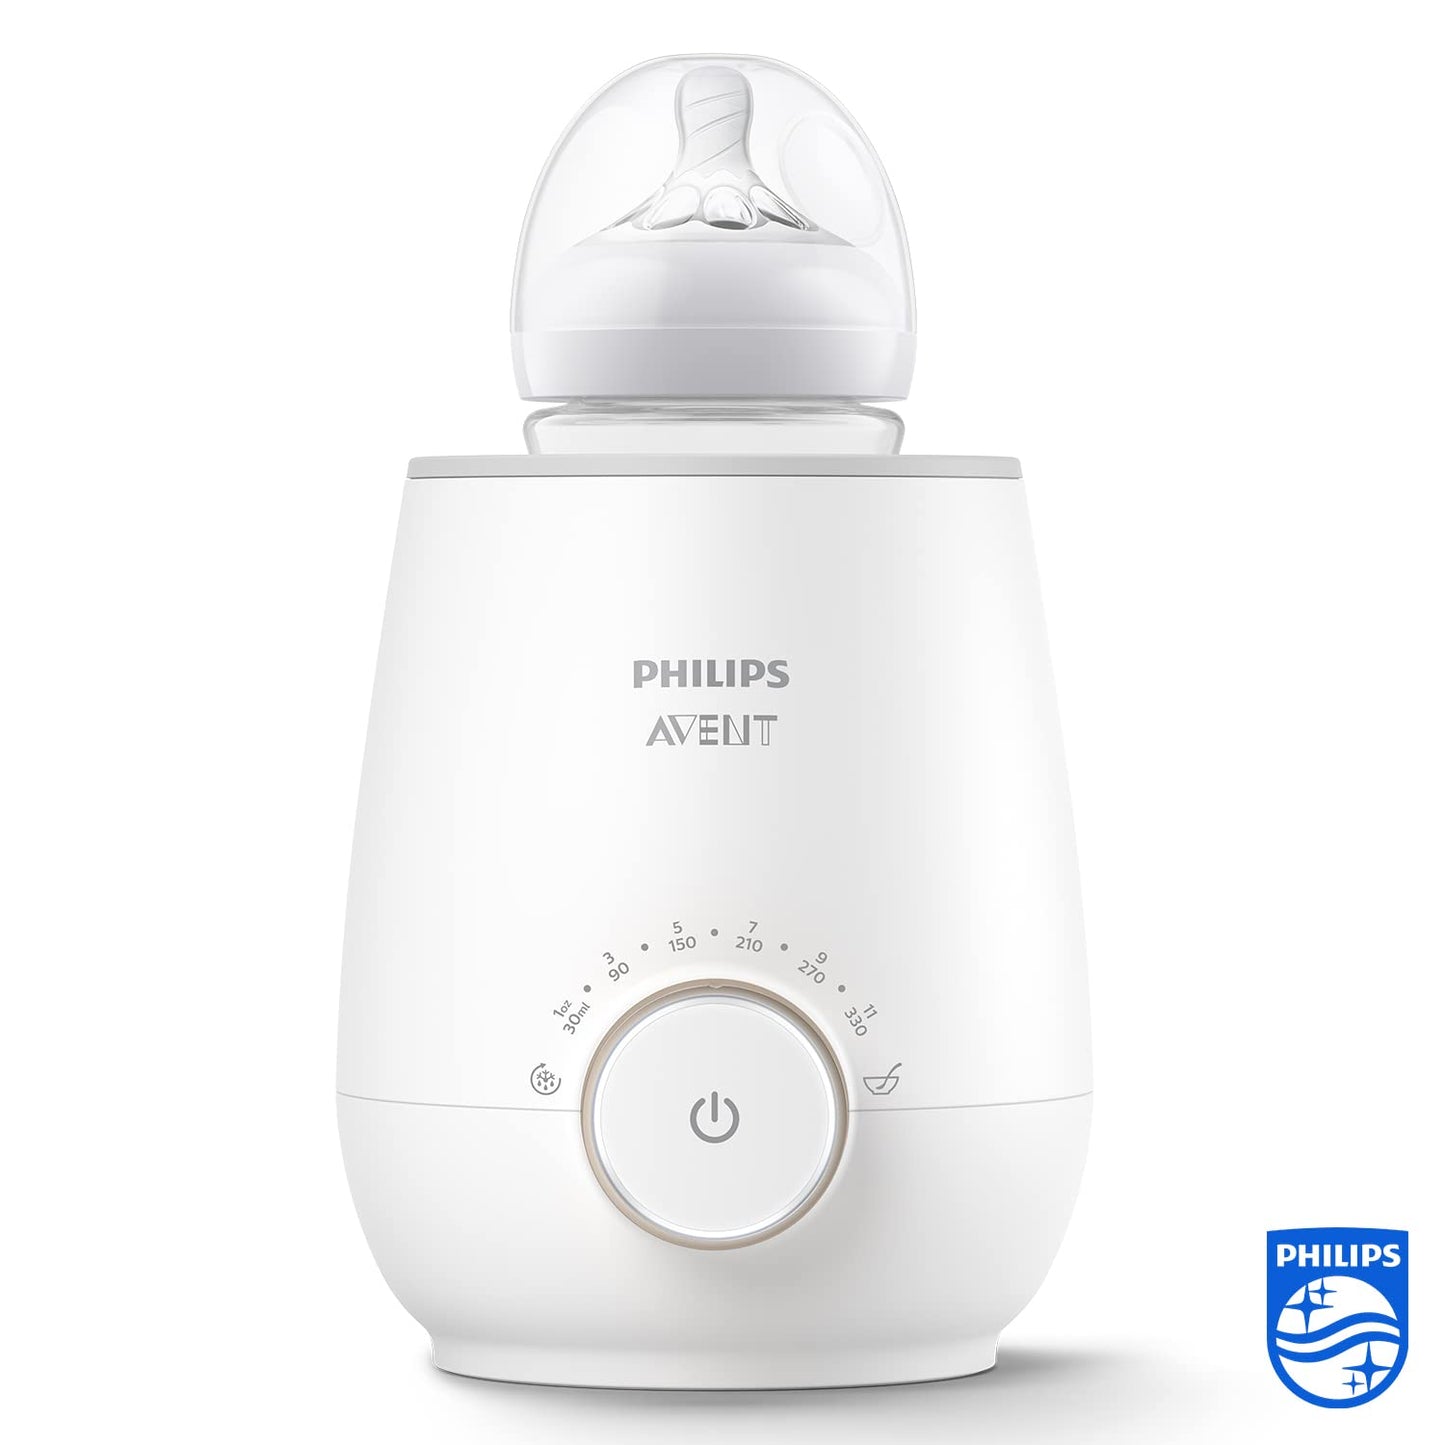 Philips AVENT SCF358/00 Bottle Warmer, for Quick and Even Heating of Milk and Baby Food, White - Baby Bliss